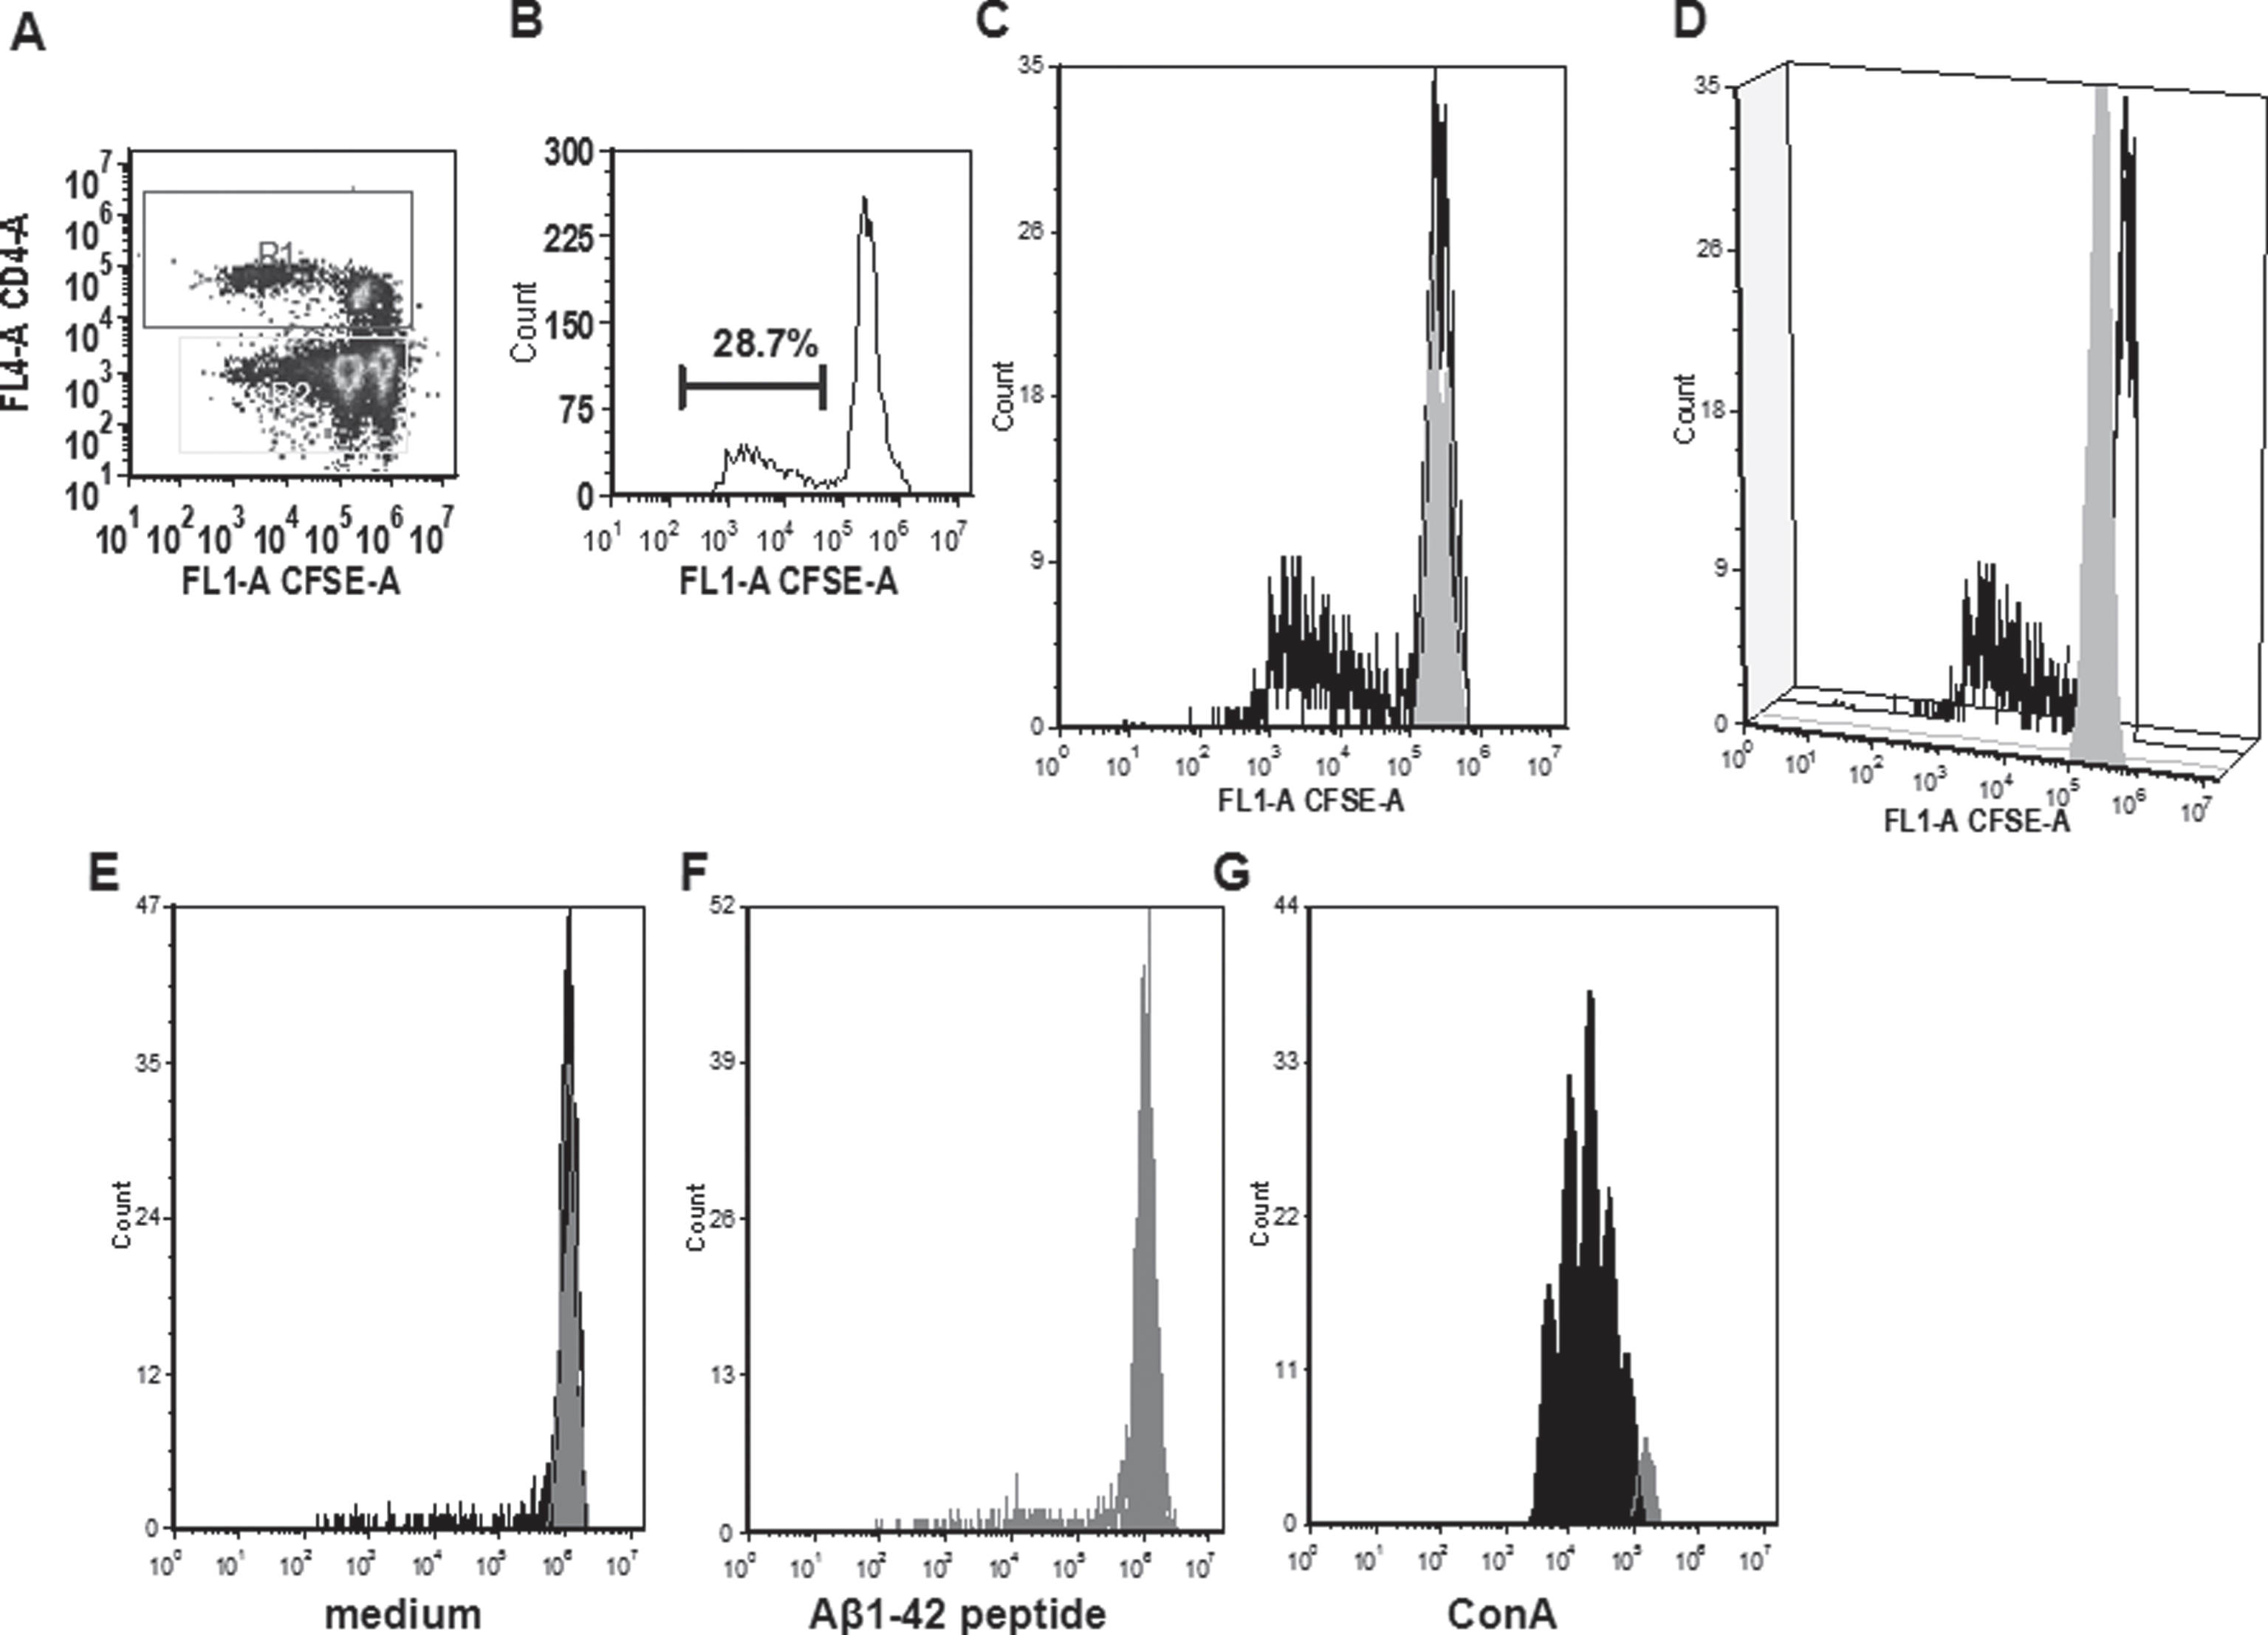 Analyses of the CD4 proliferation in rabbits 833D (A to D) and 831D (E to G). A) A characteristic dot histogram for the analysis of proliferating cells is shown. Gates were set around the CD4+ T cells (R1). B) Histogram and marker show the percentage of proliferating cells. C, D) These cells were further analyzed using the FCS express proliferation software. E-G) The same analyses for CD4+ T cells of a different rabbit in medium (E), Aβ42 peptide containing medium (F), and after ConA stimulation (G).